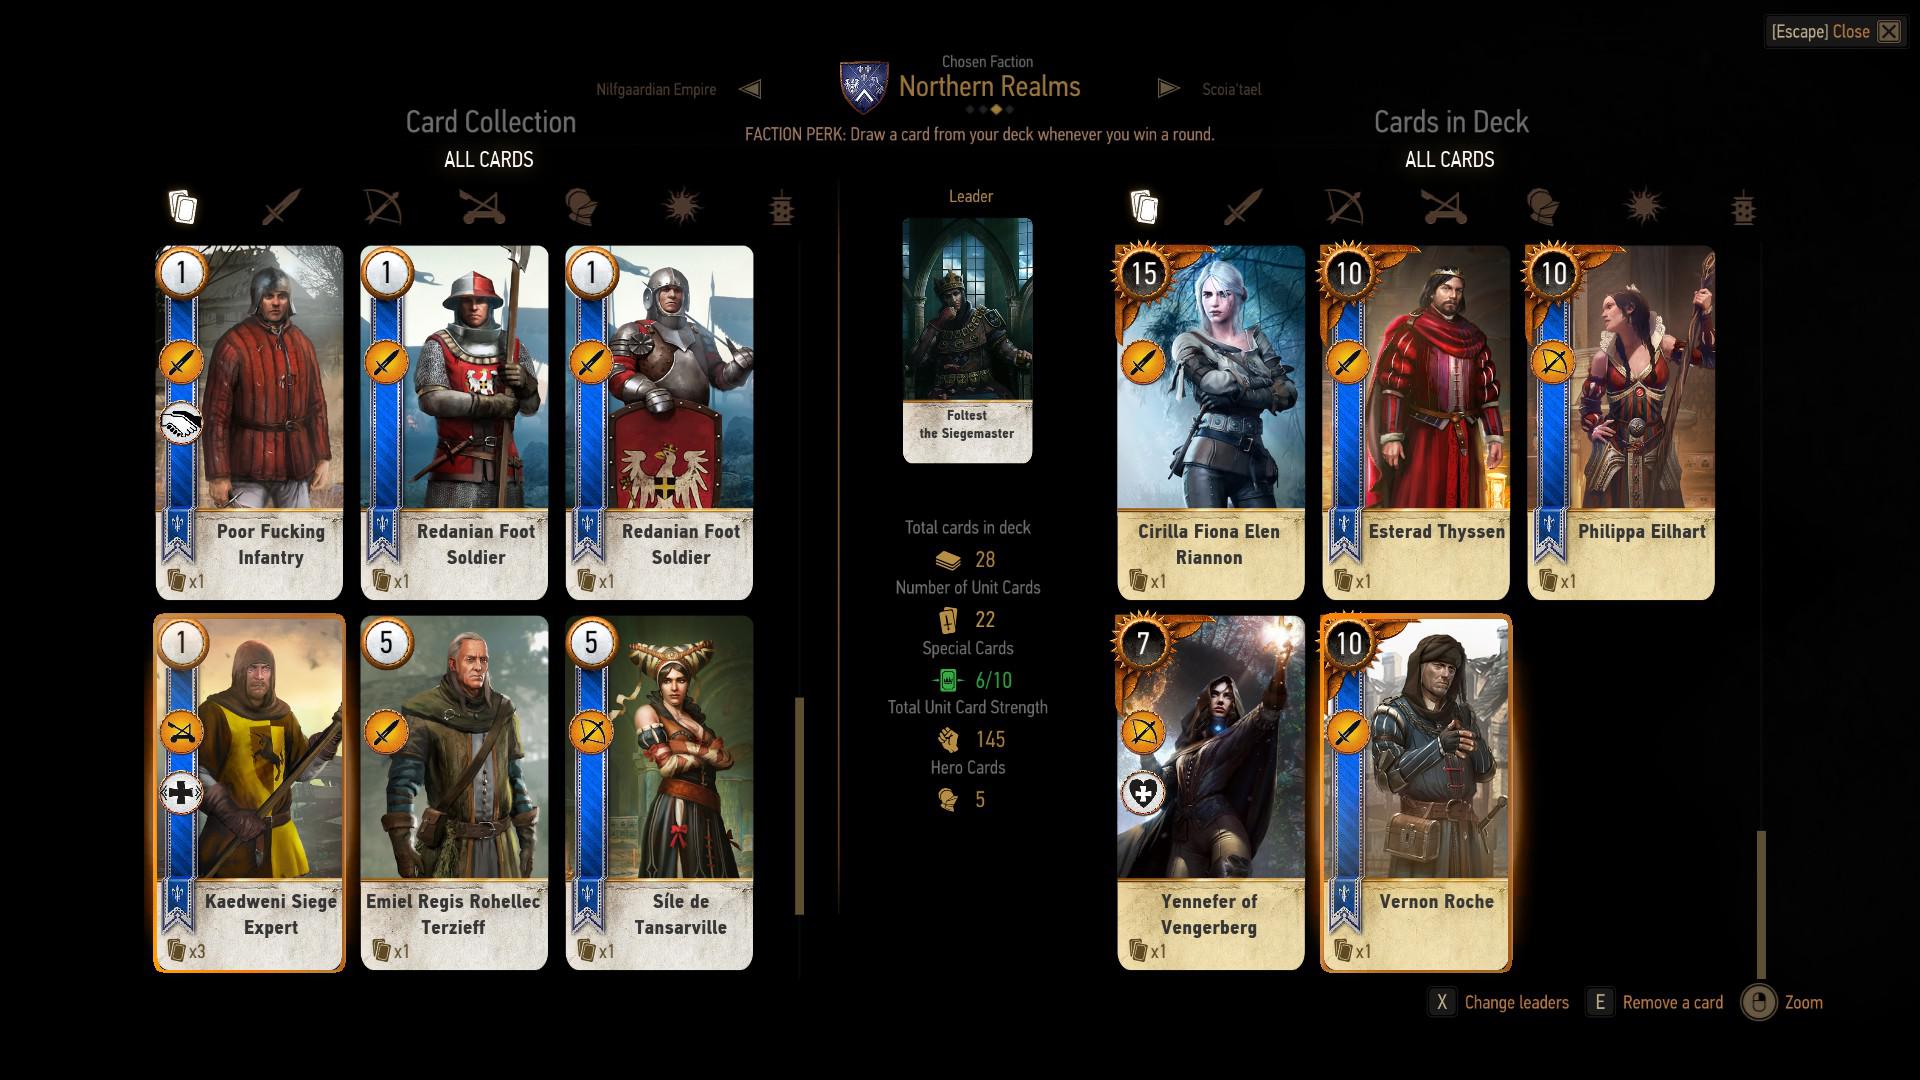 The Witcher 3 trophy guide, Full list of trophies & achievements